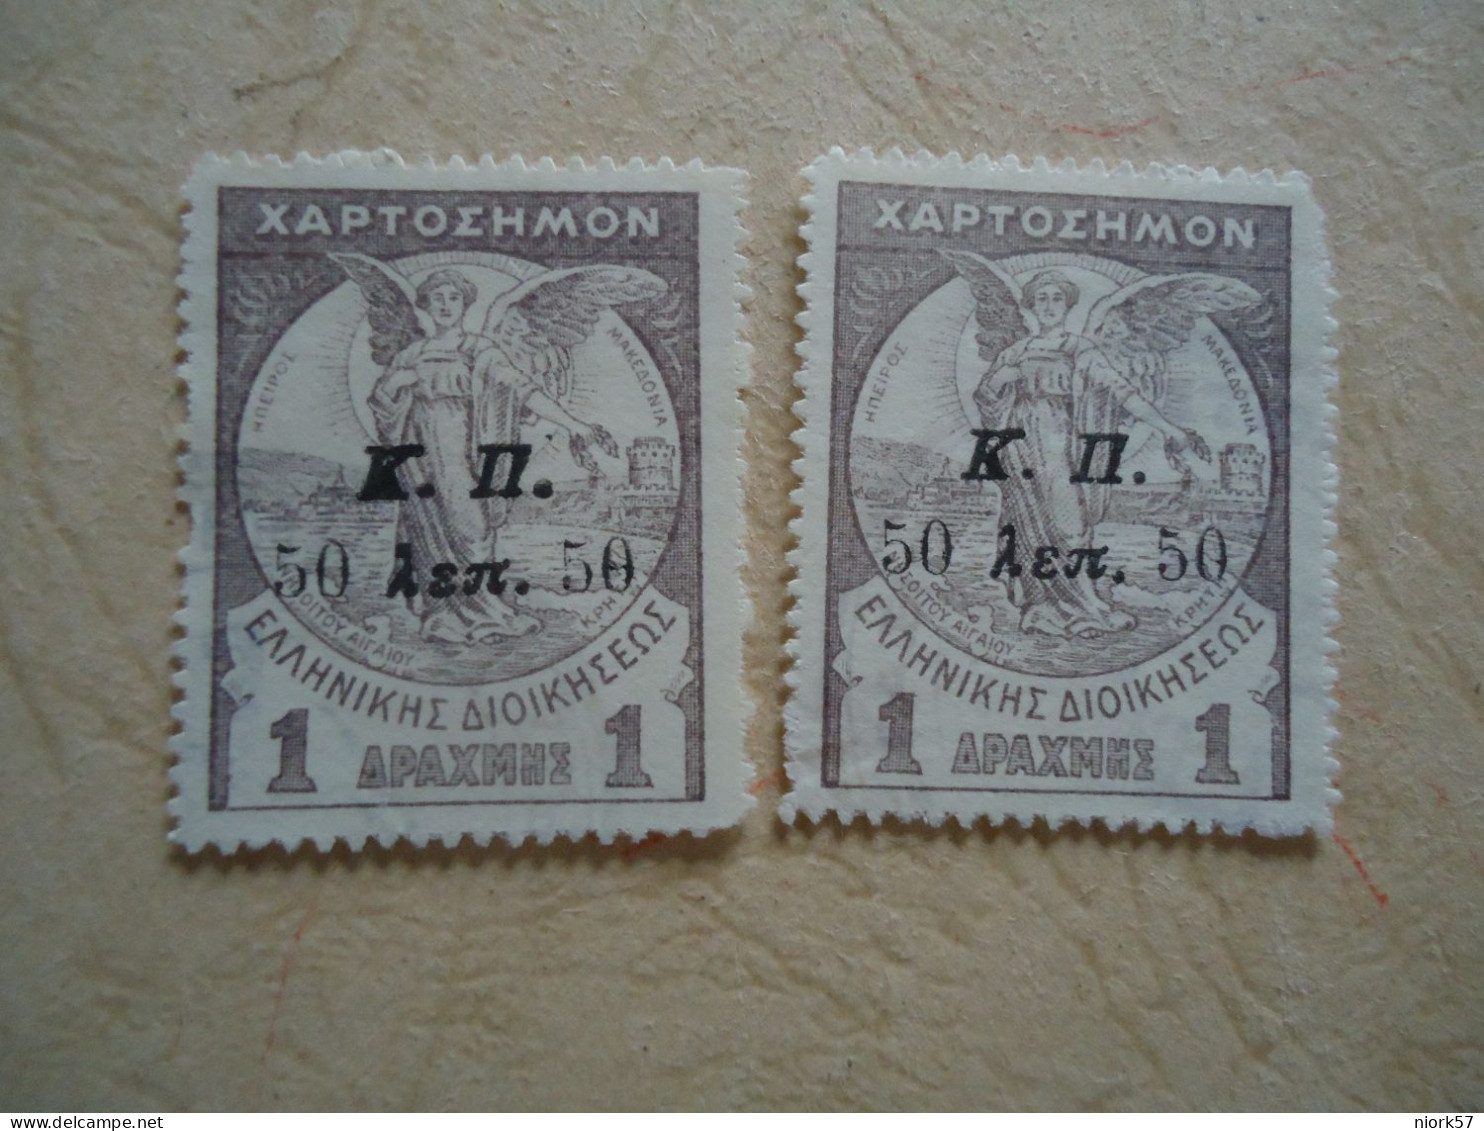 GREECE    ΜΝΗ   2 STAMPS   CHARITY    Κ.Π  ΛΕΠΤΩΝ 1DR/50L - Used Stamps